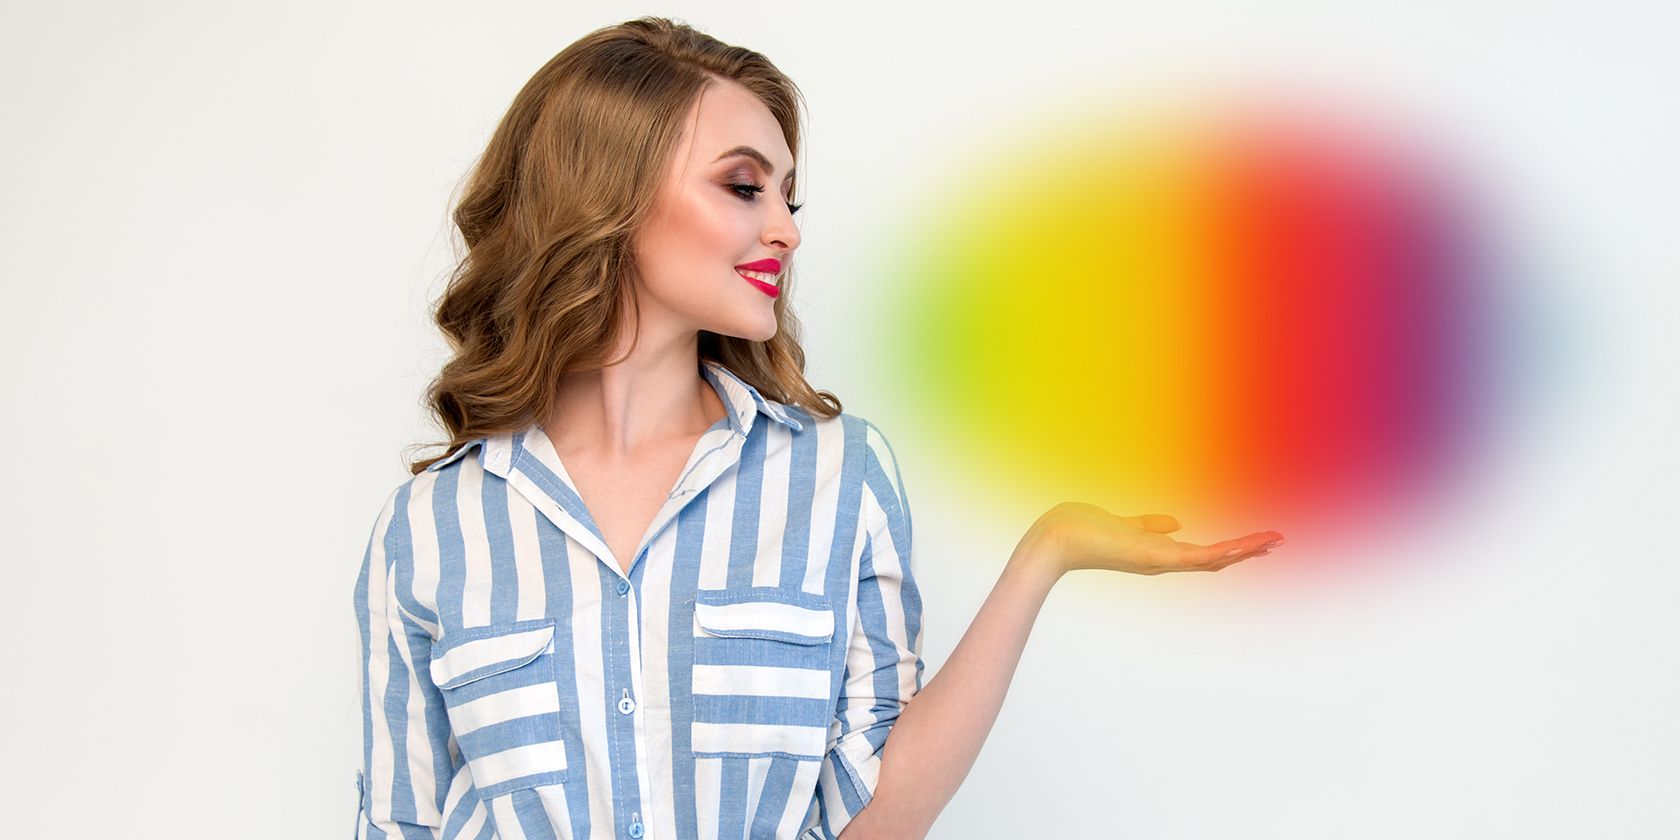 A woman holding a spherical gradient